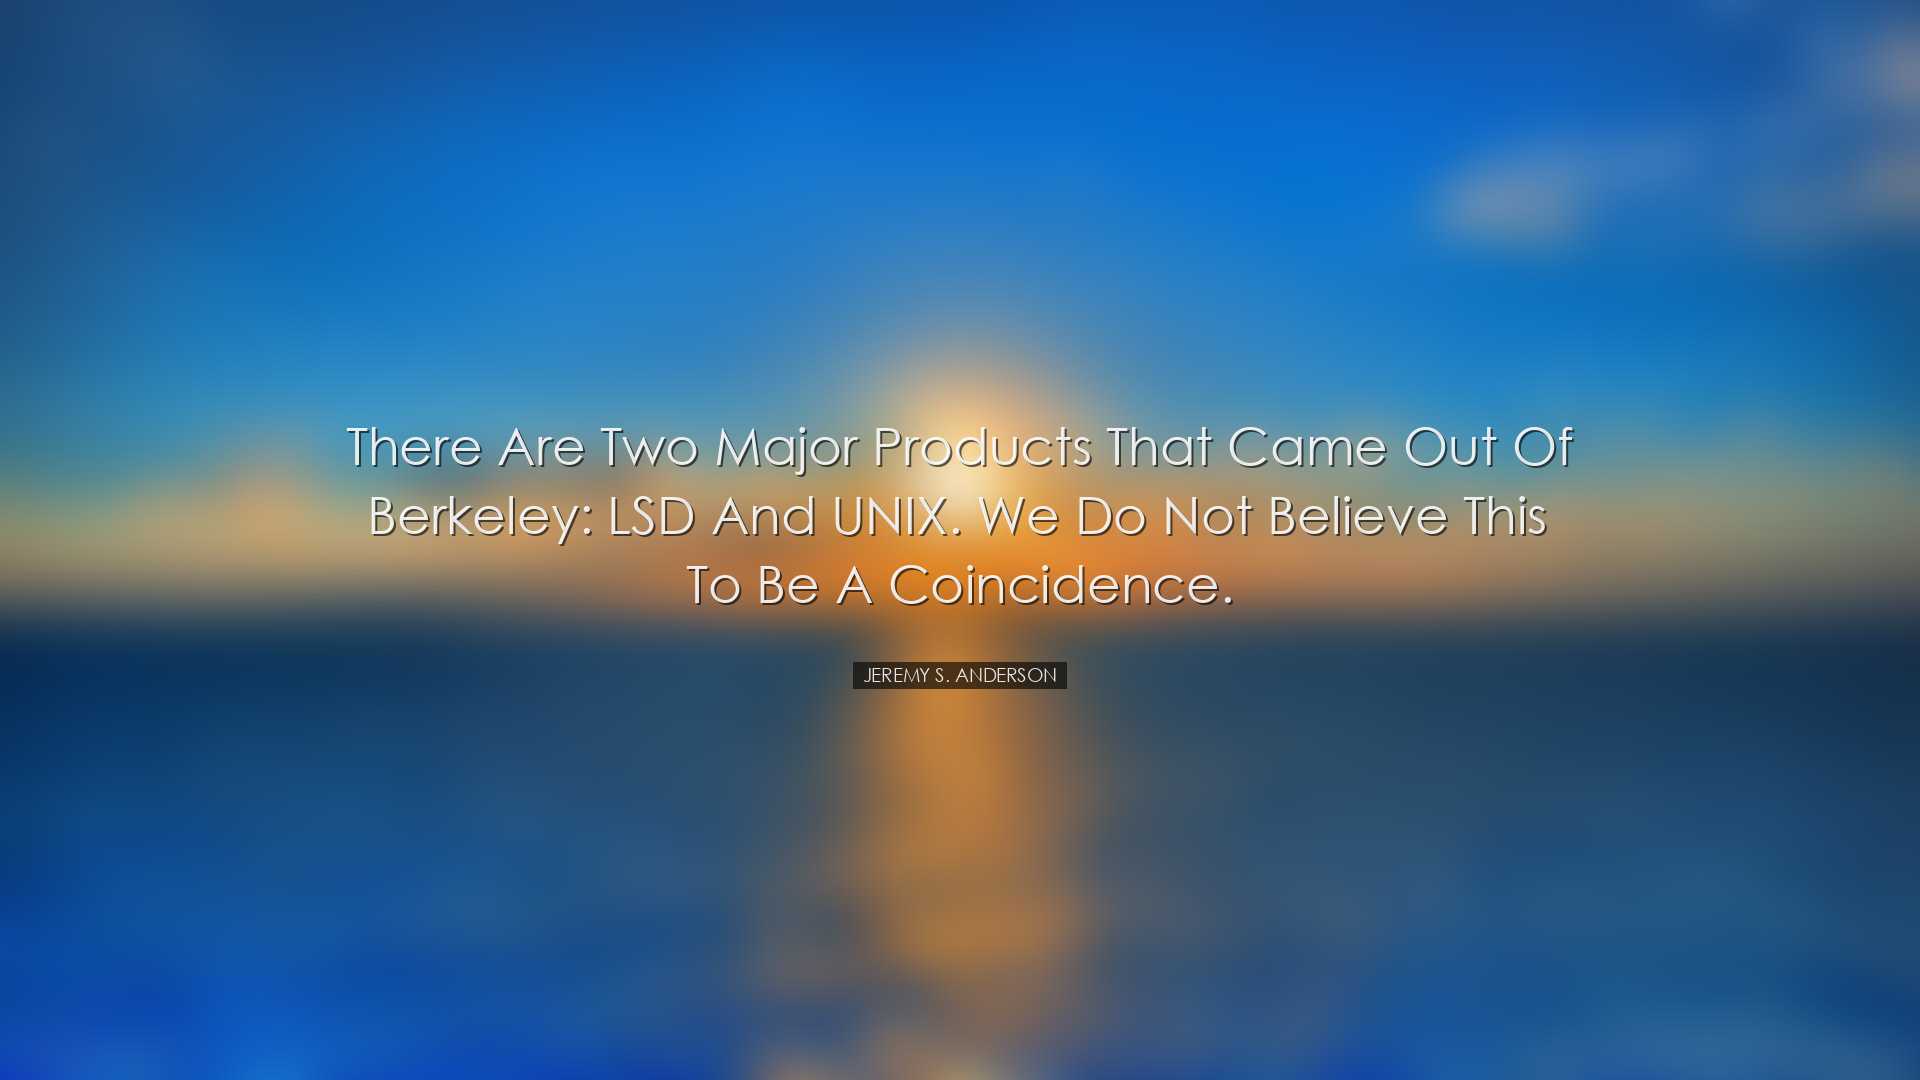 There are two major products that came out of Berkeley: LSD and UN